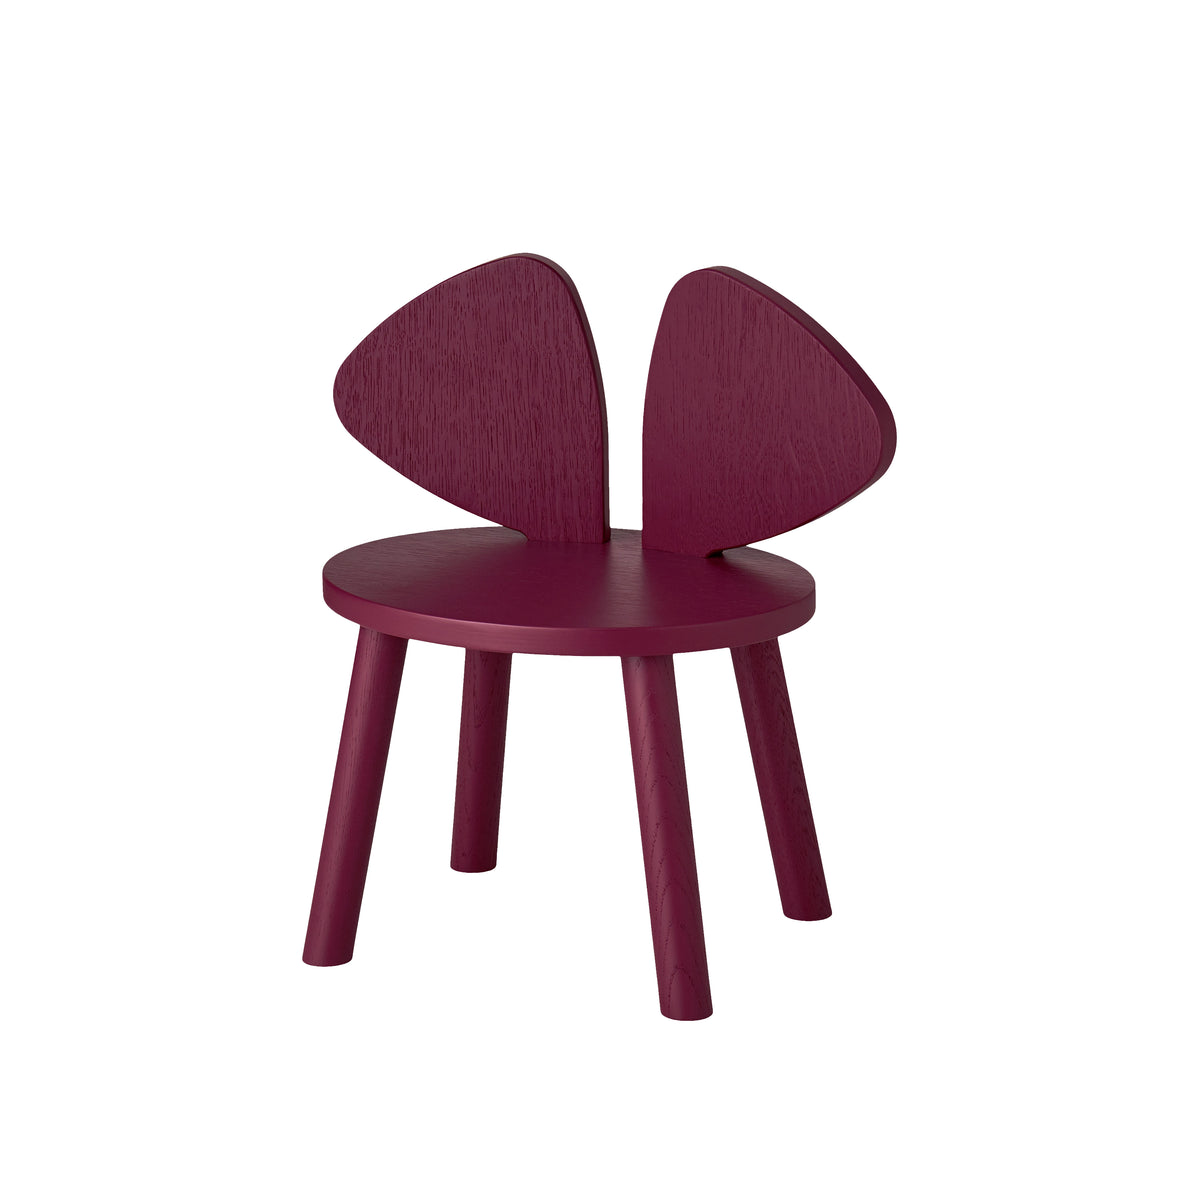 Mouse Chair - Burgundy Red - Nofred